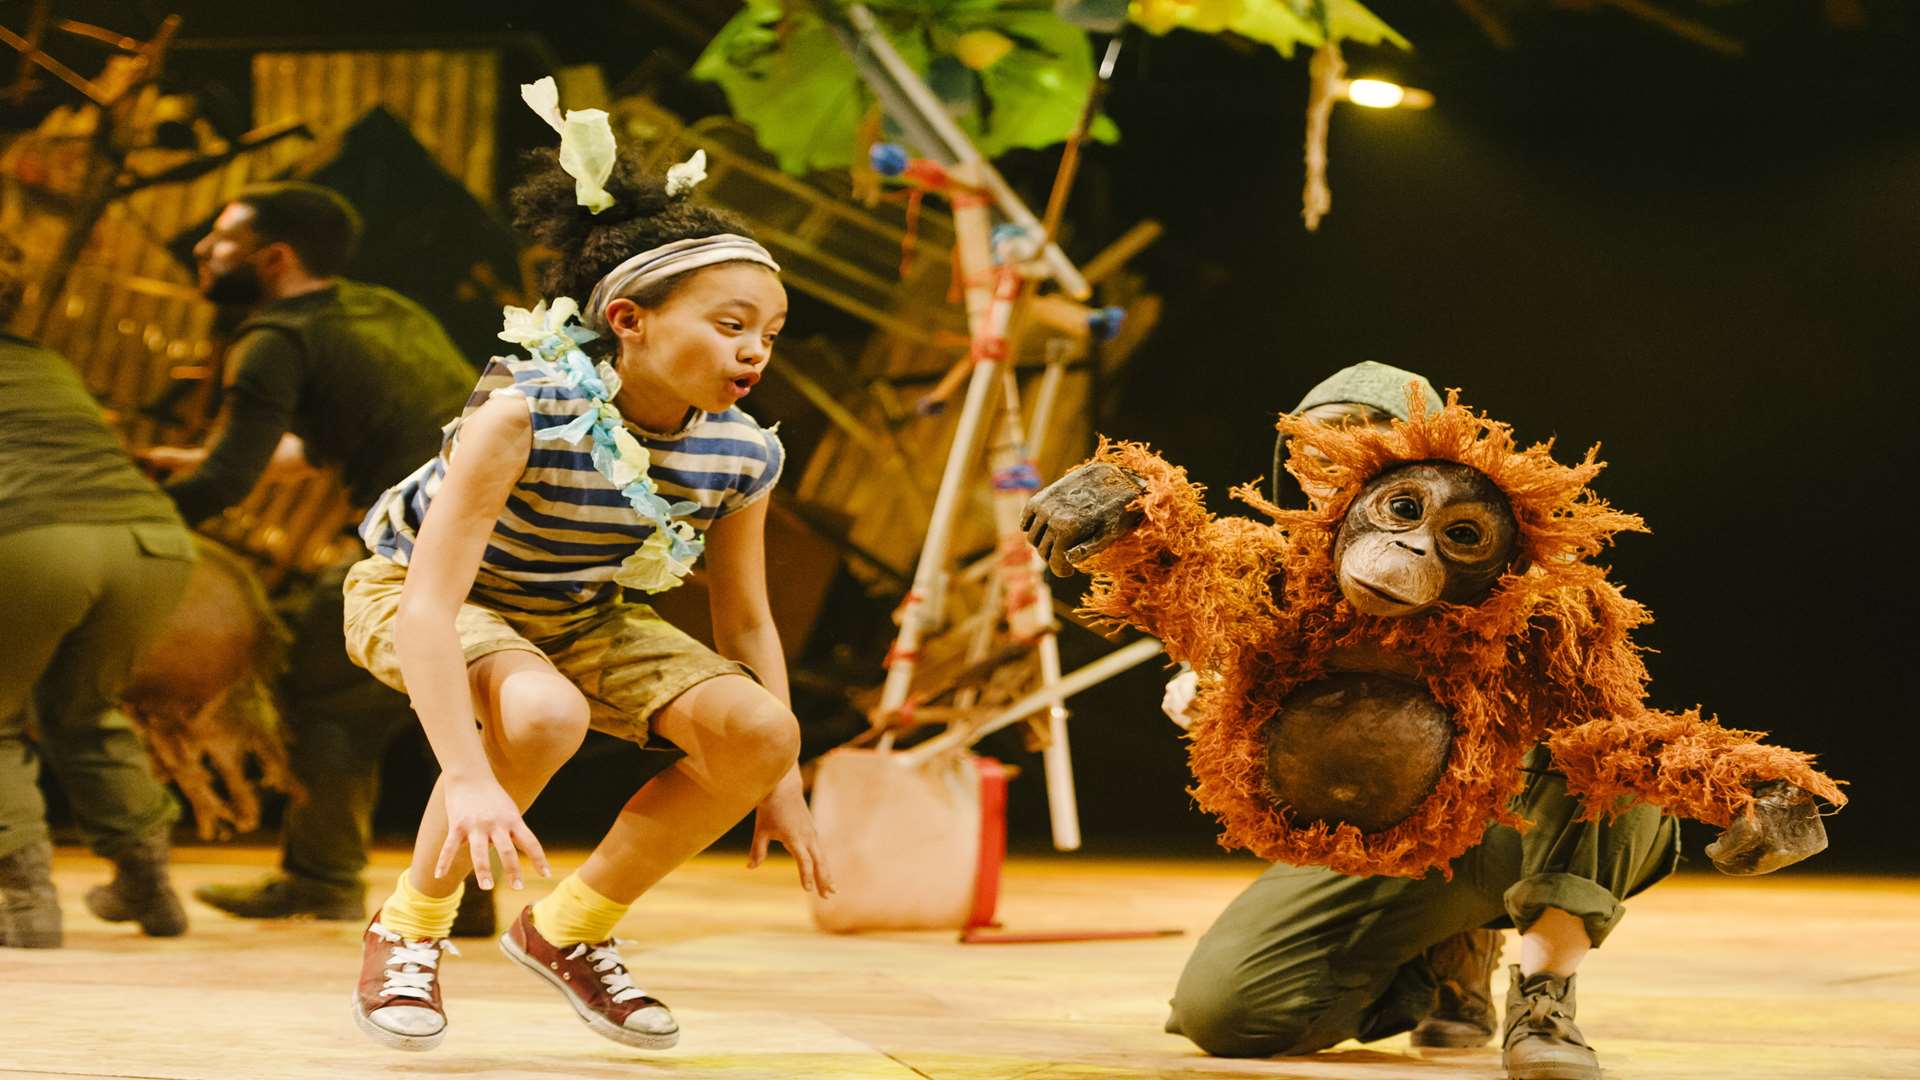 India Brown as Lilly with Frank in Running Wild